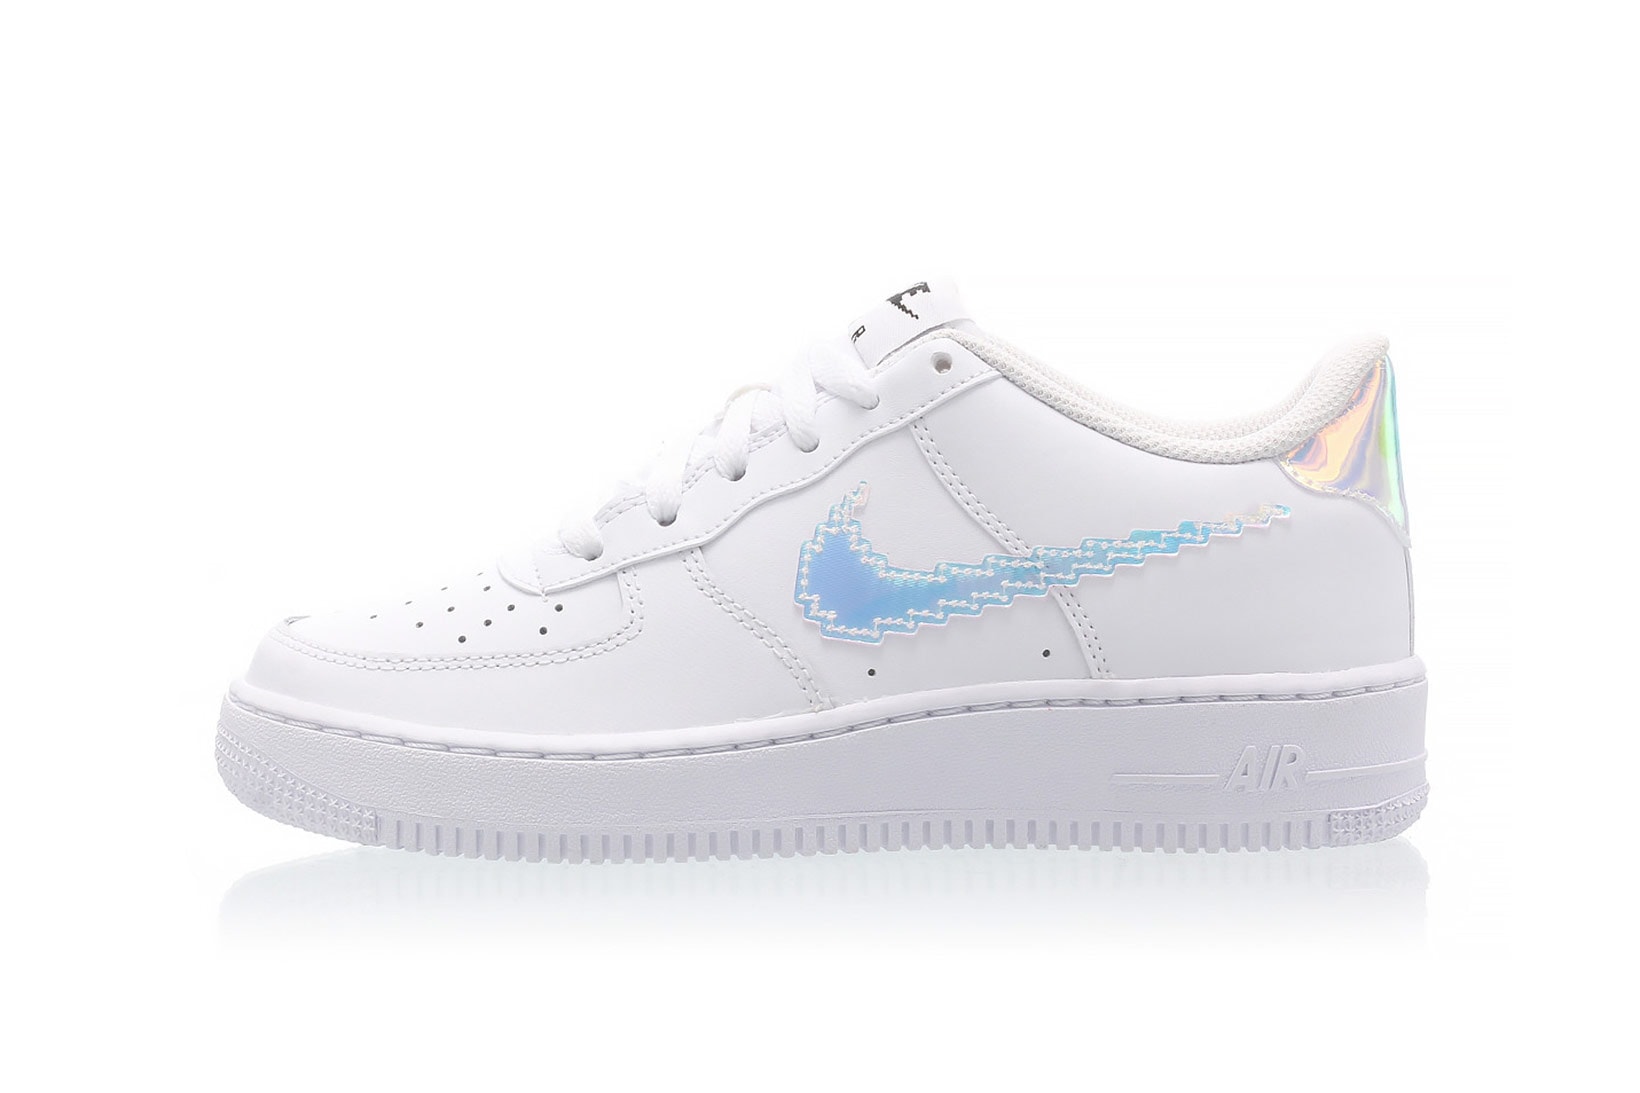 Brand New Limited Edition Air Force Ones Lv8 1 GS for Sale in